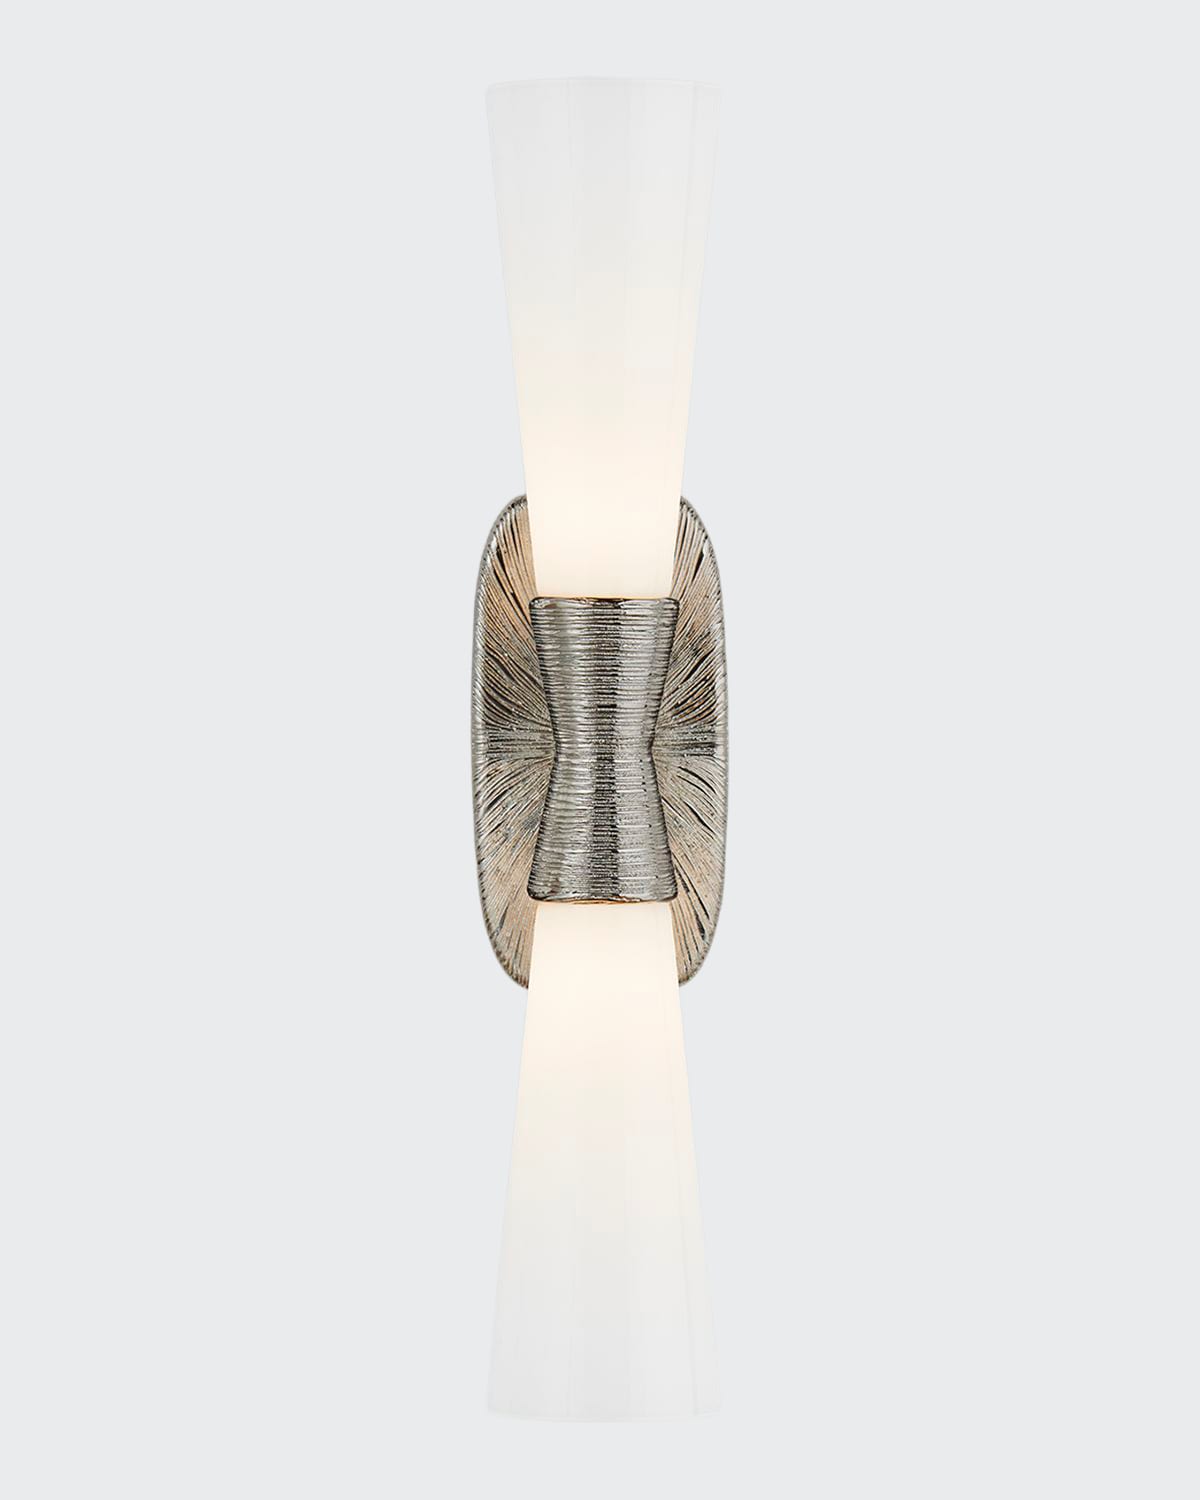 Kelly Wearstler For Visual Comfort Signature Utopia Large Double Bath Sconce In Polished Nickel